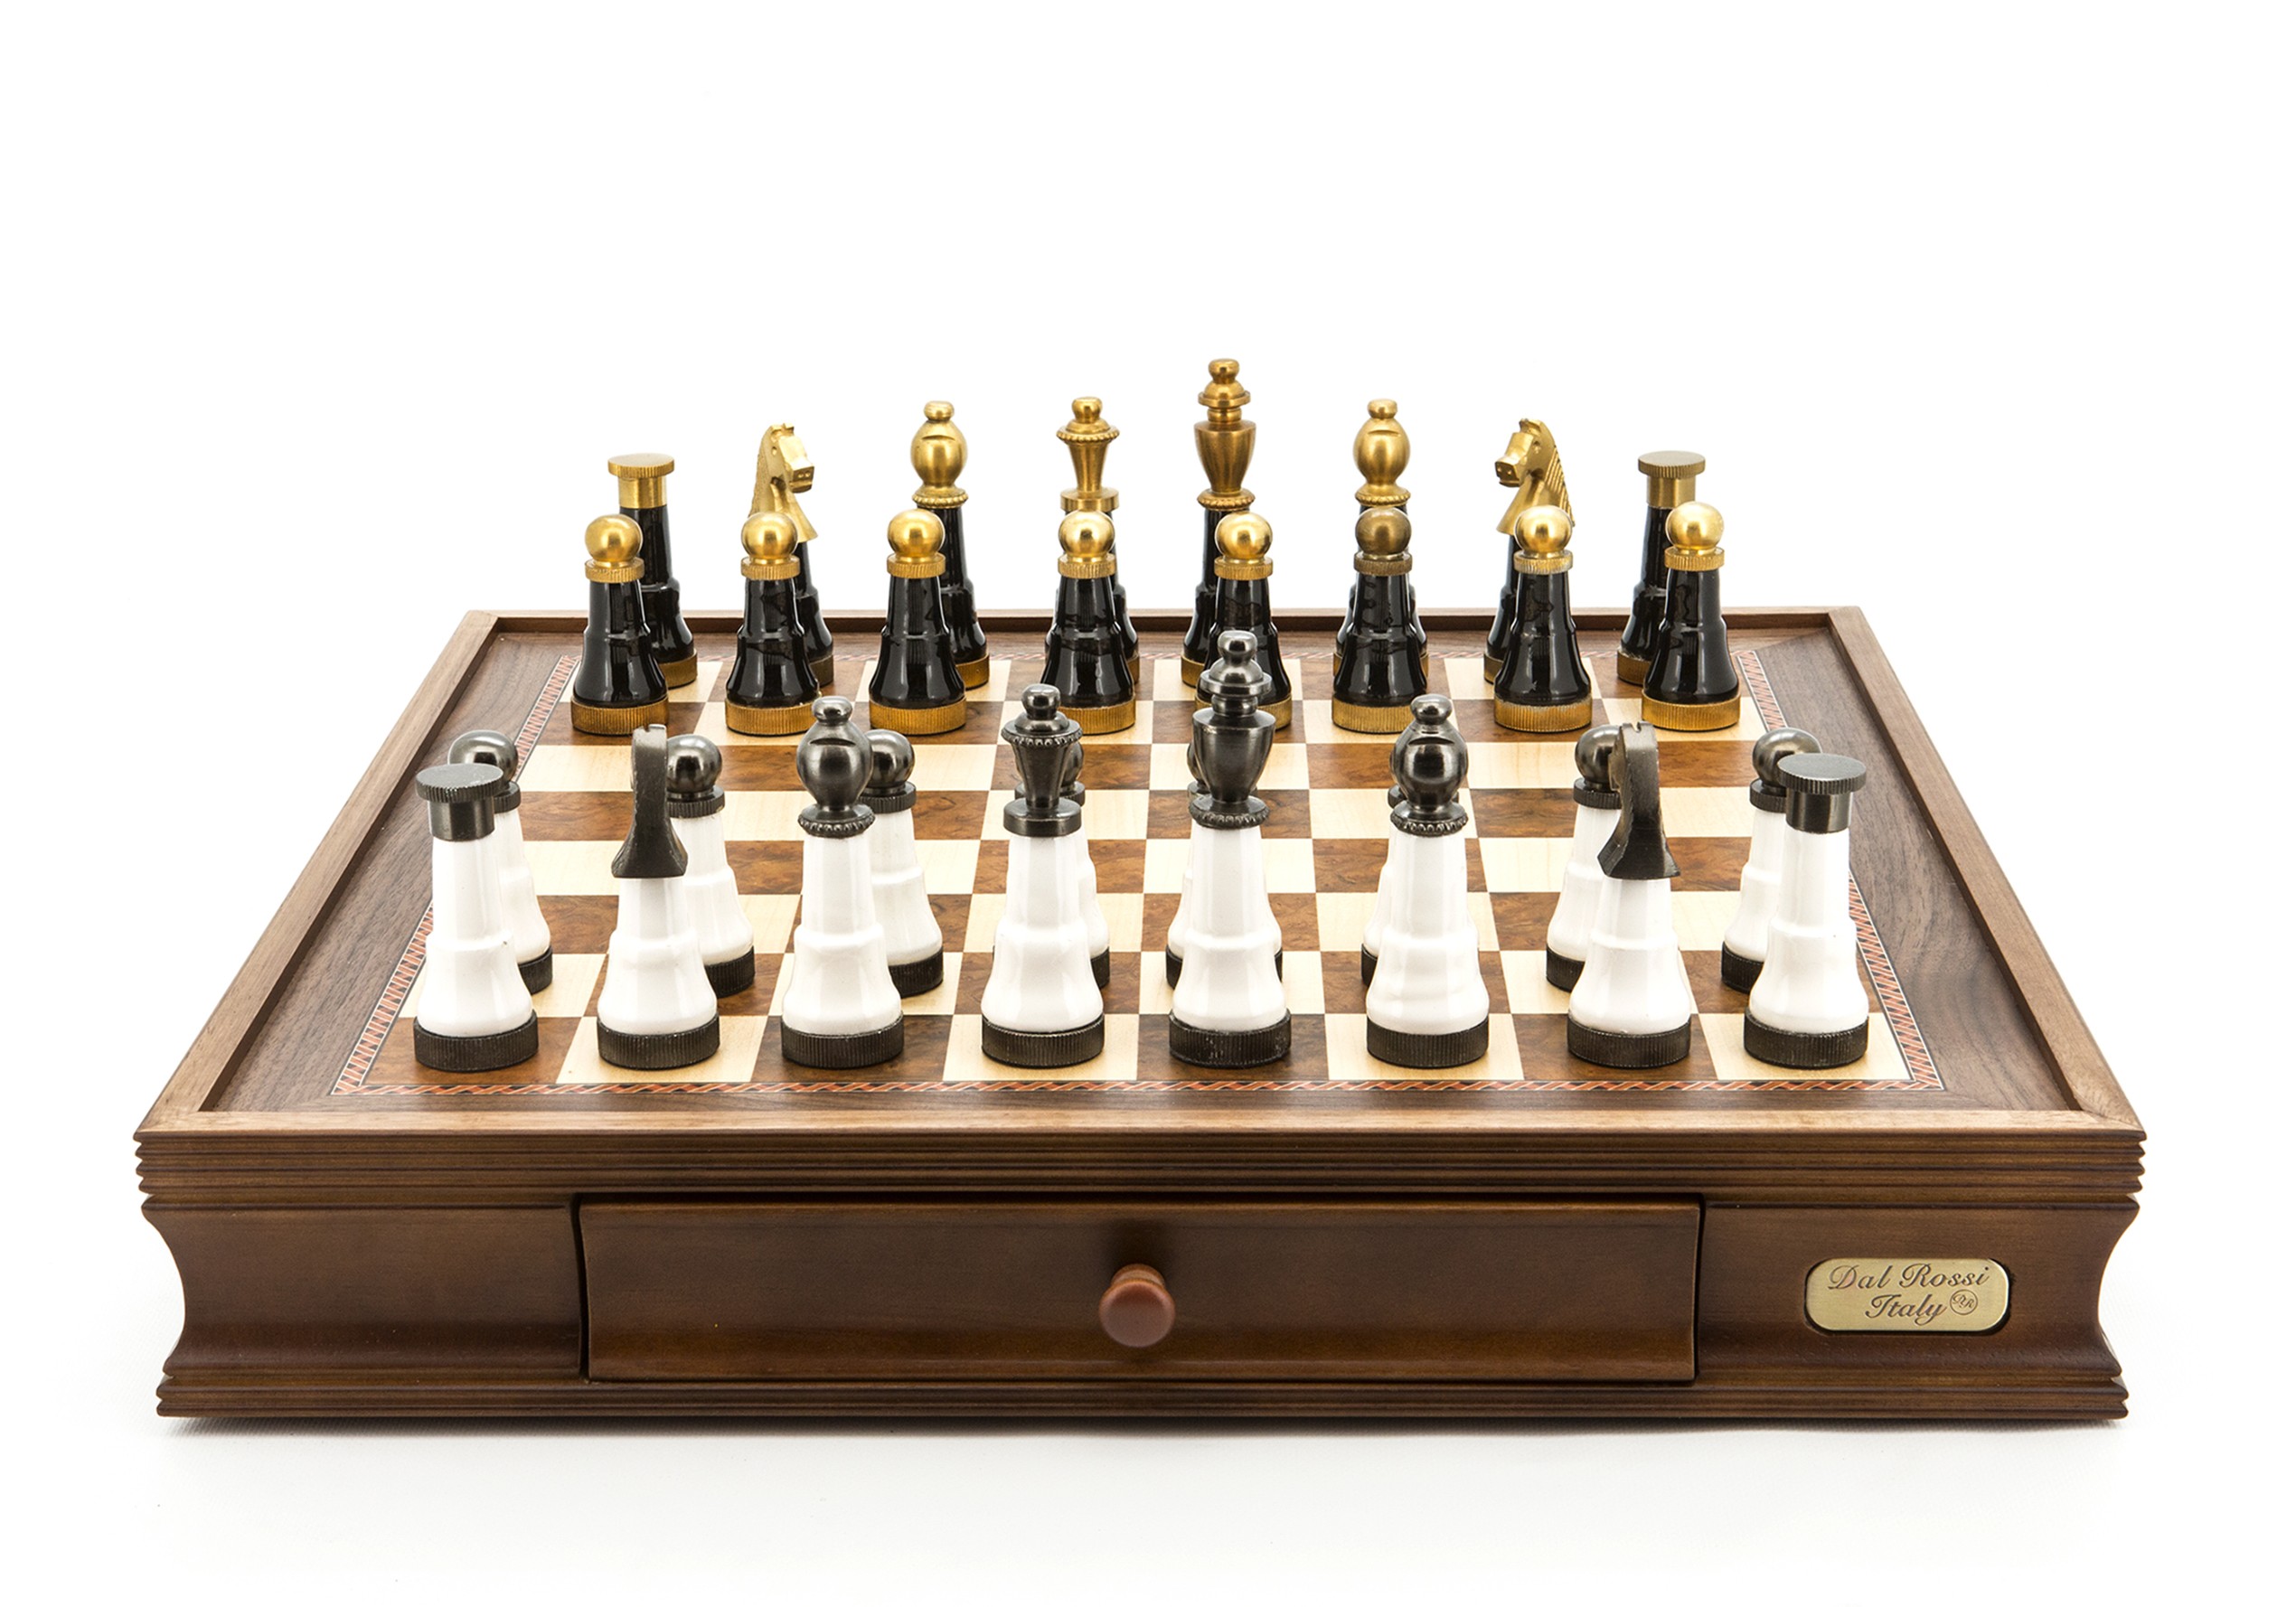 Dal Rossi Italy Chess Set Walnut Finish 20″ With Two Drawers, With Black and White with Gold and Gun Metal Tops and Bottoms Chessmen 110mm 